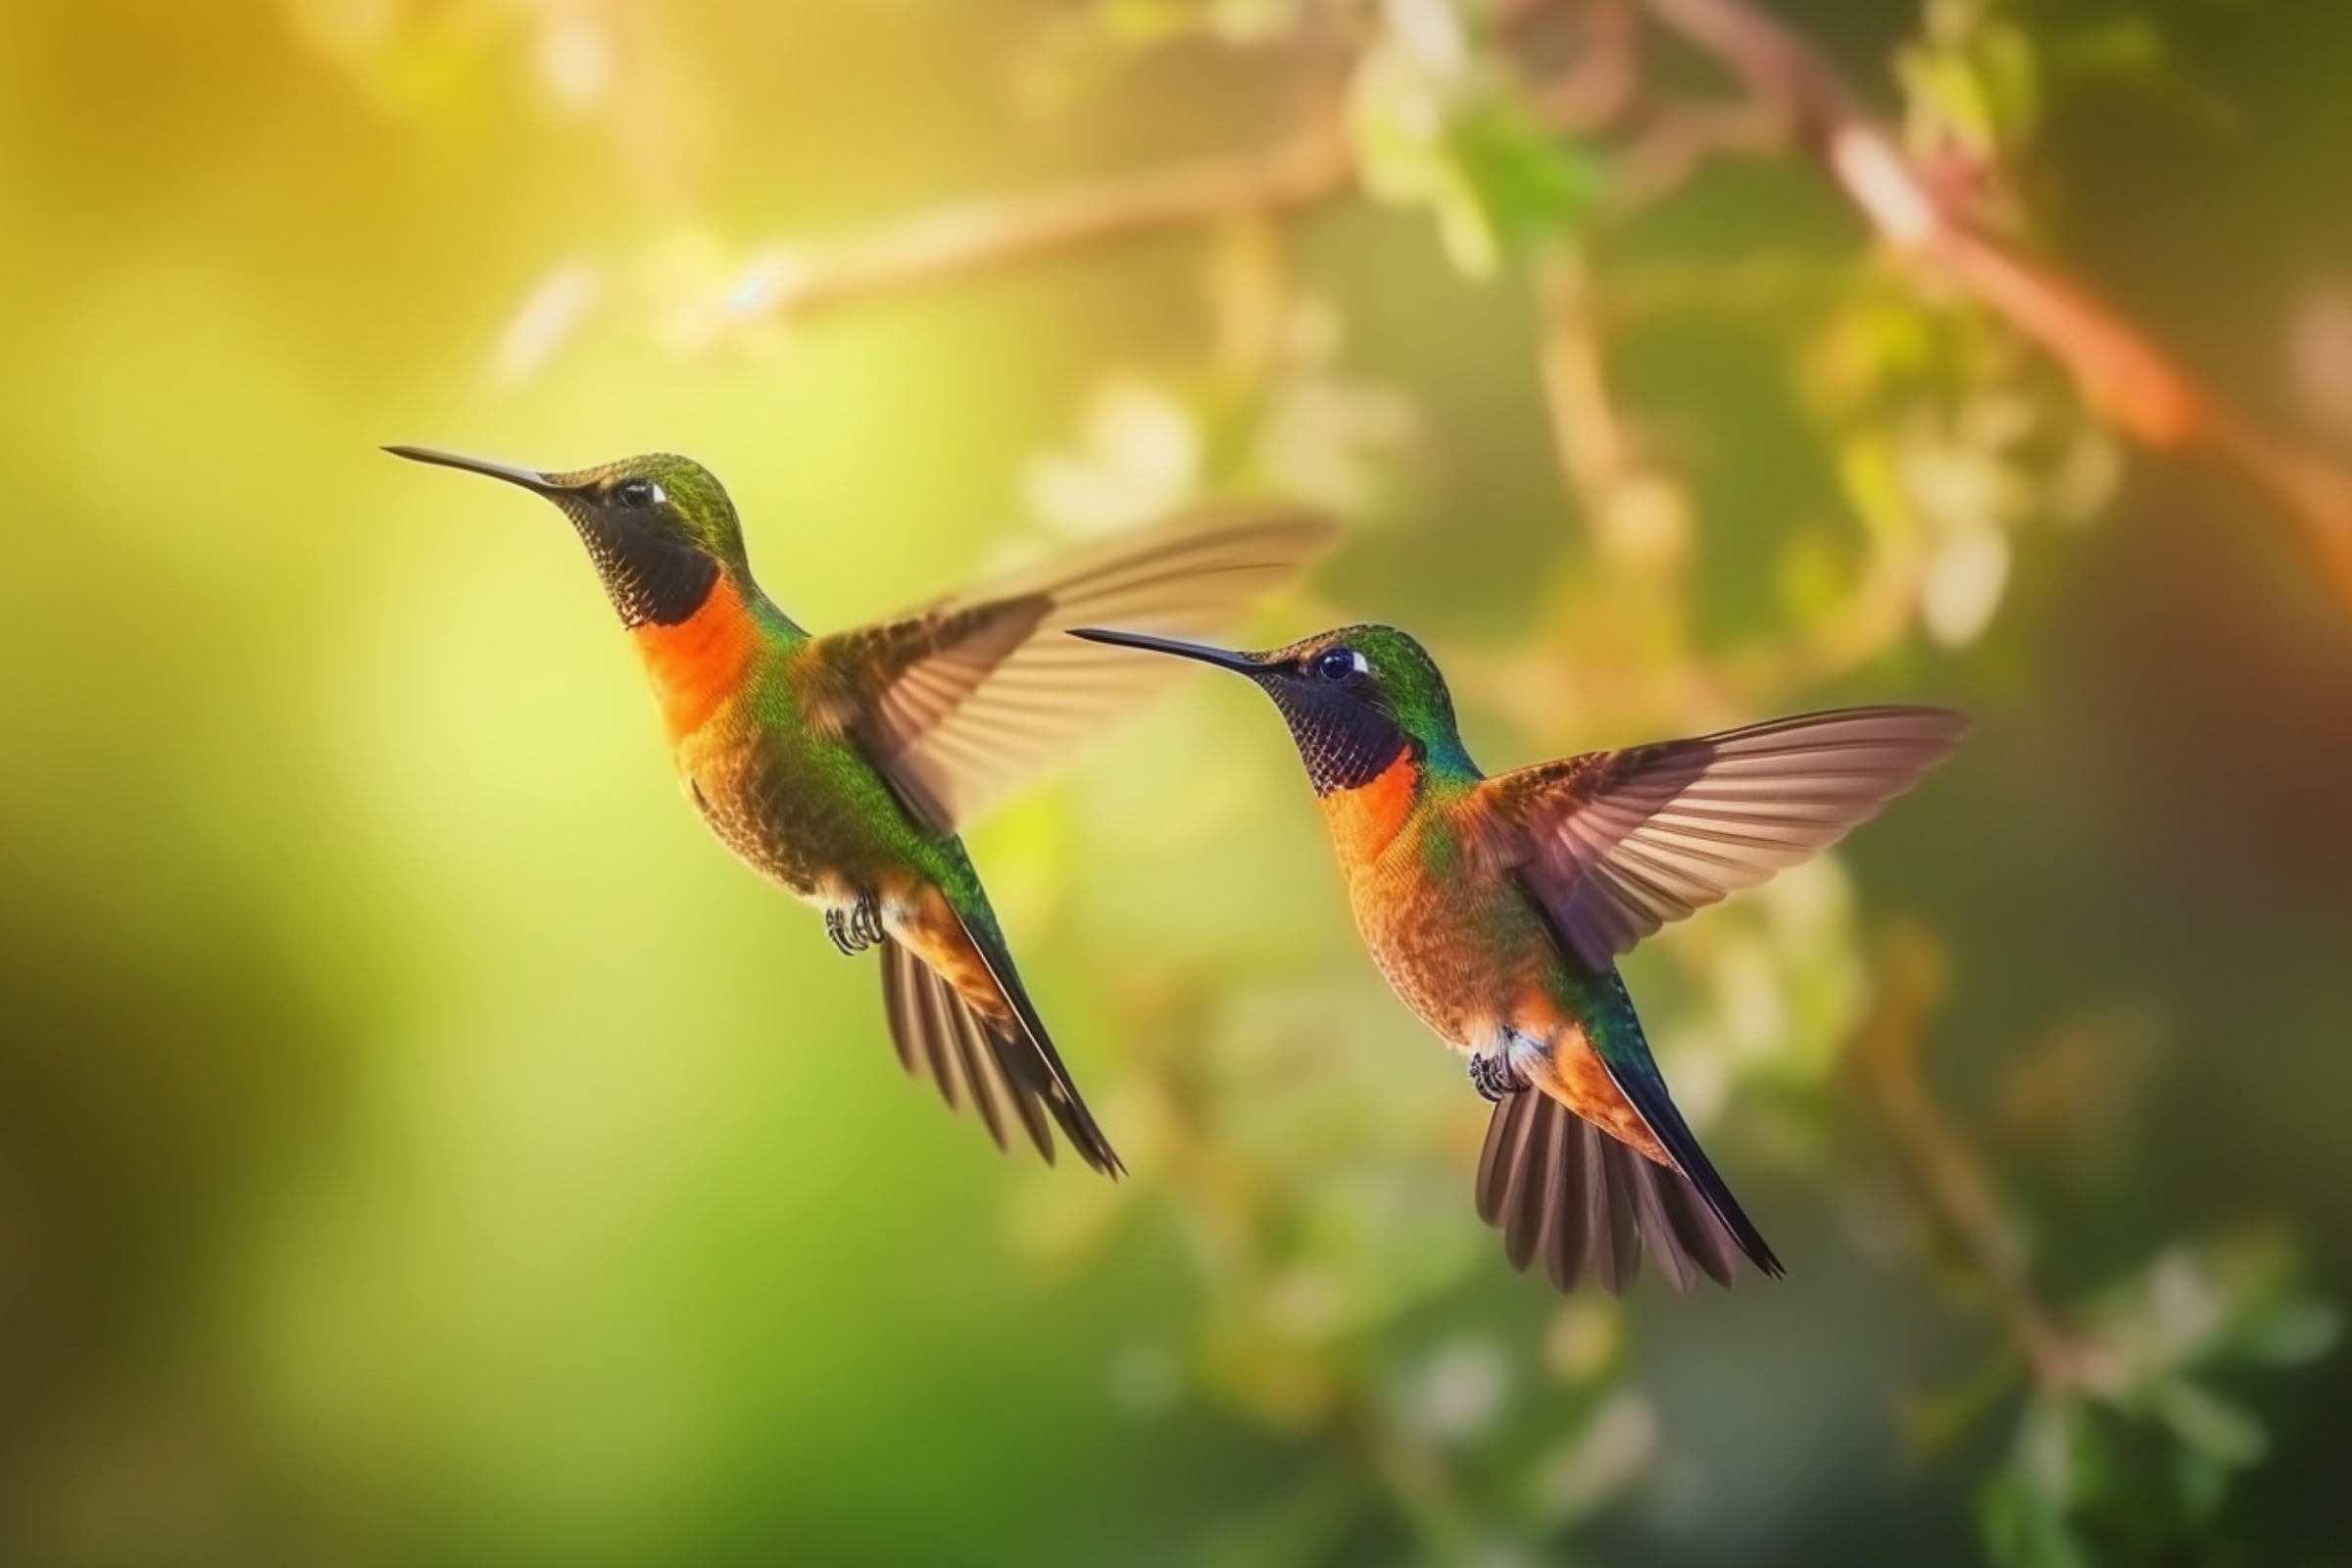 Are Hummingbirds in Europe